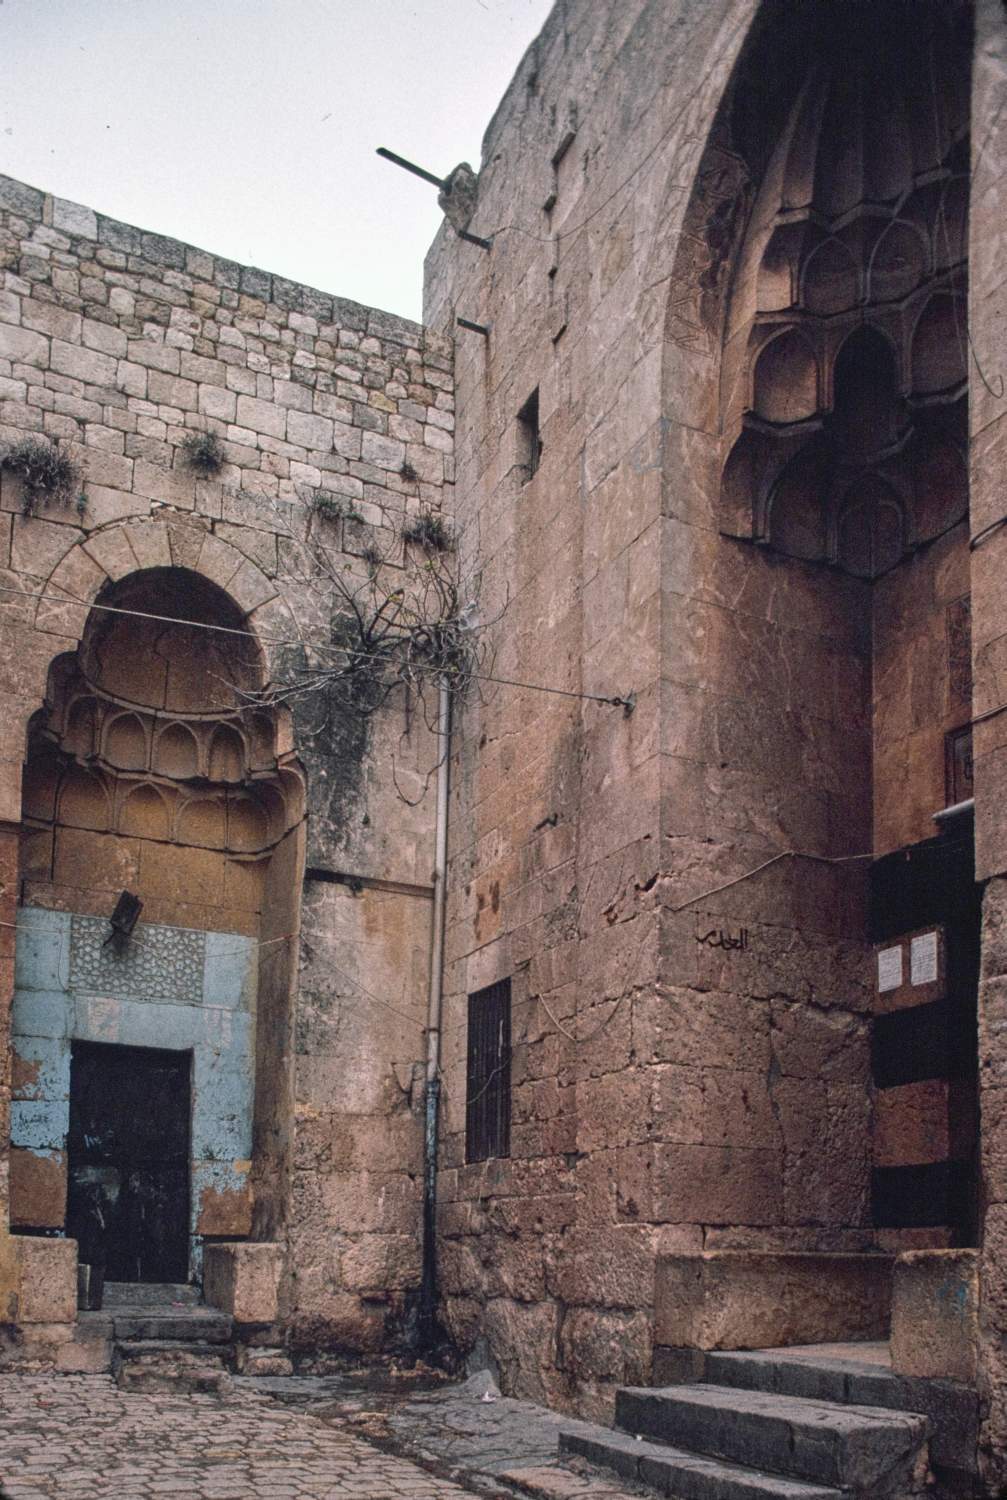 View of entrance portals, with small north portal to residential unit at left and larger entrance portal to madrasa at right.